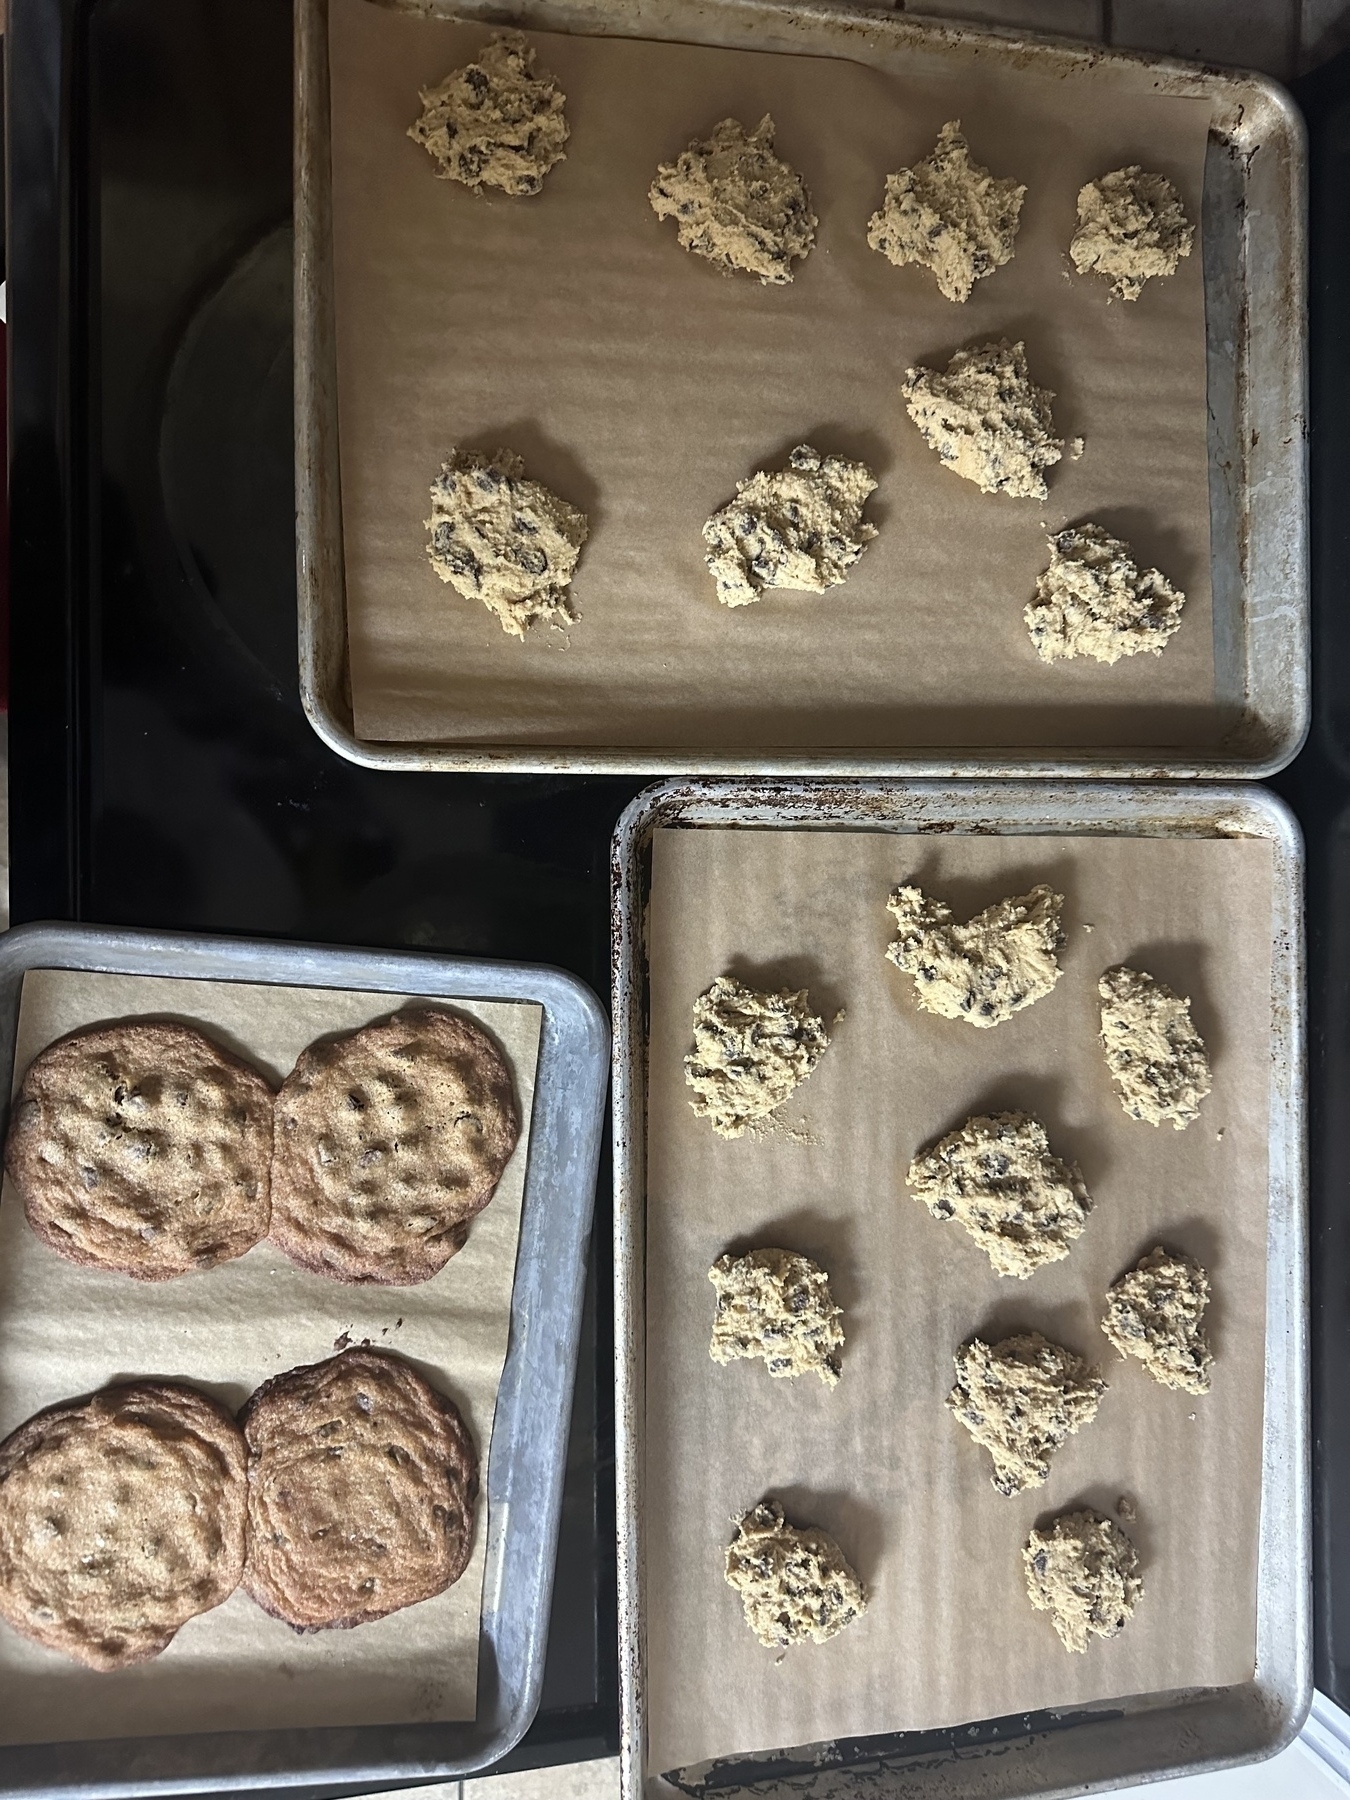 A small tray of baked chocolate chip cookies and two larger trays on uncooked dough